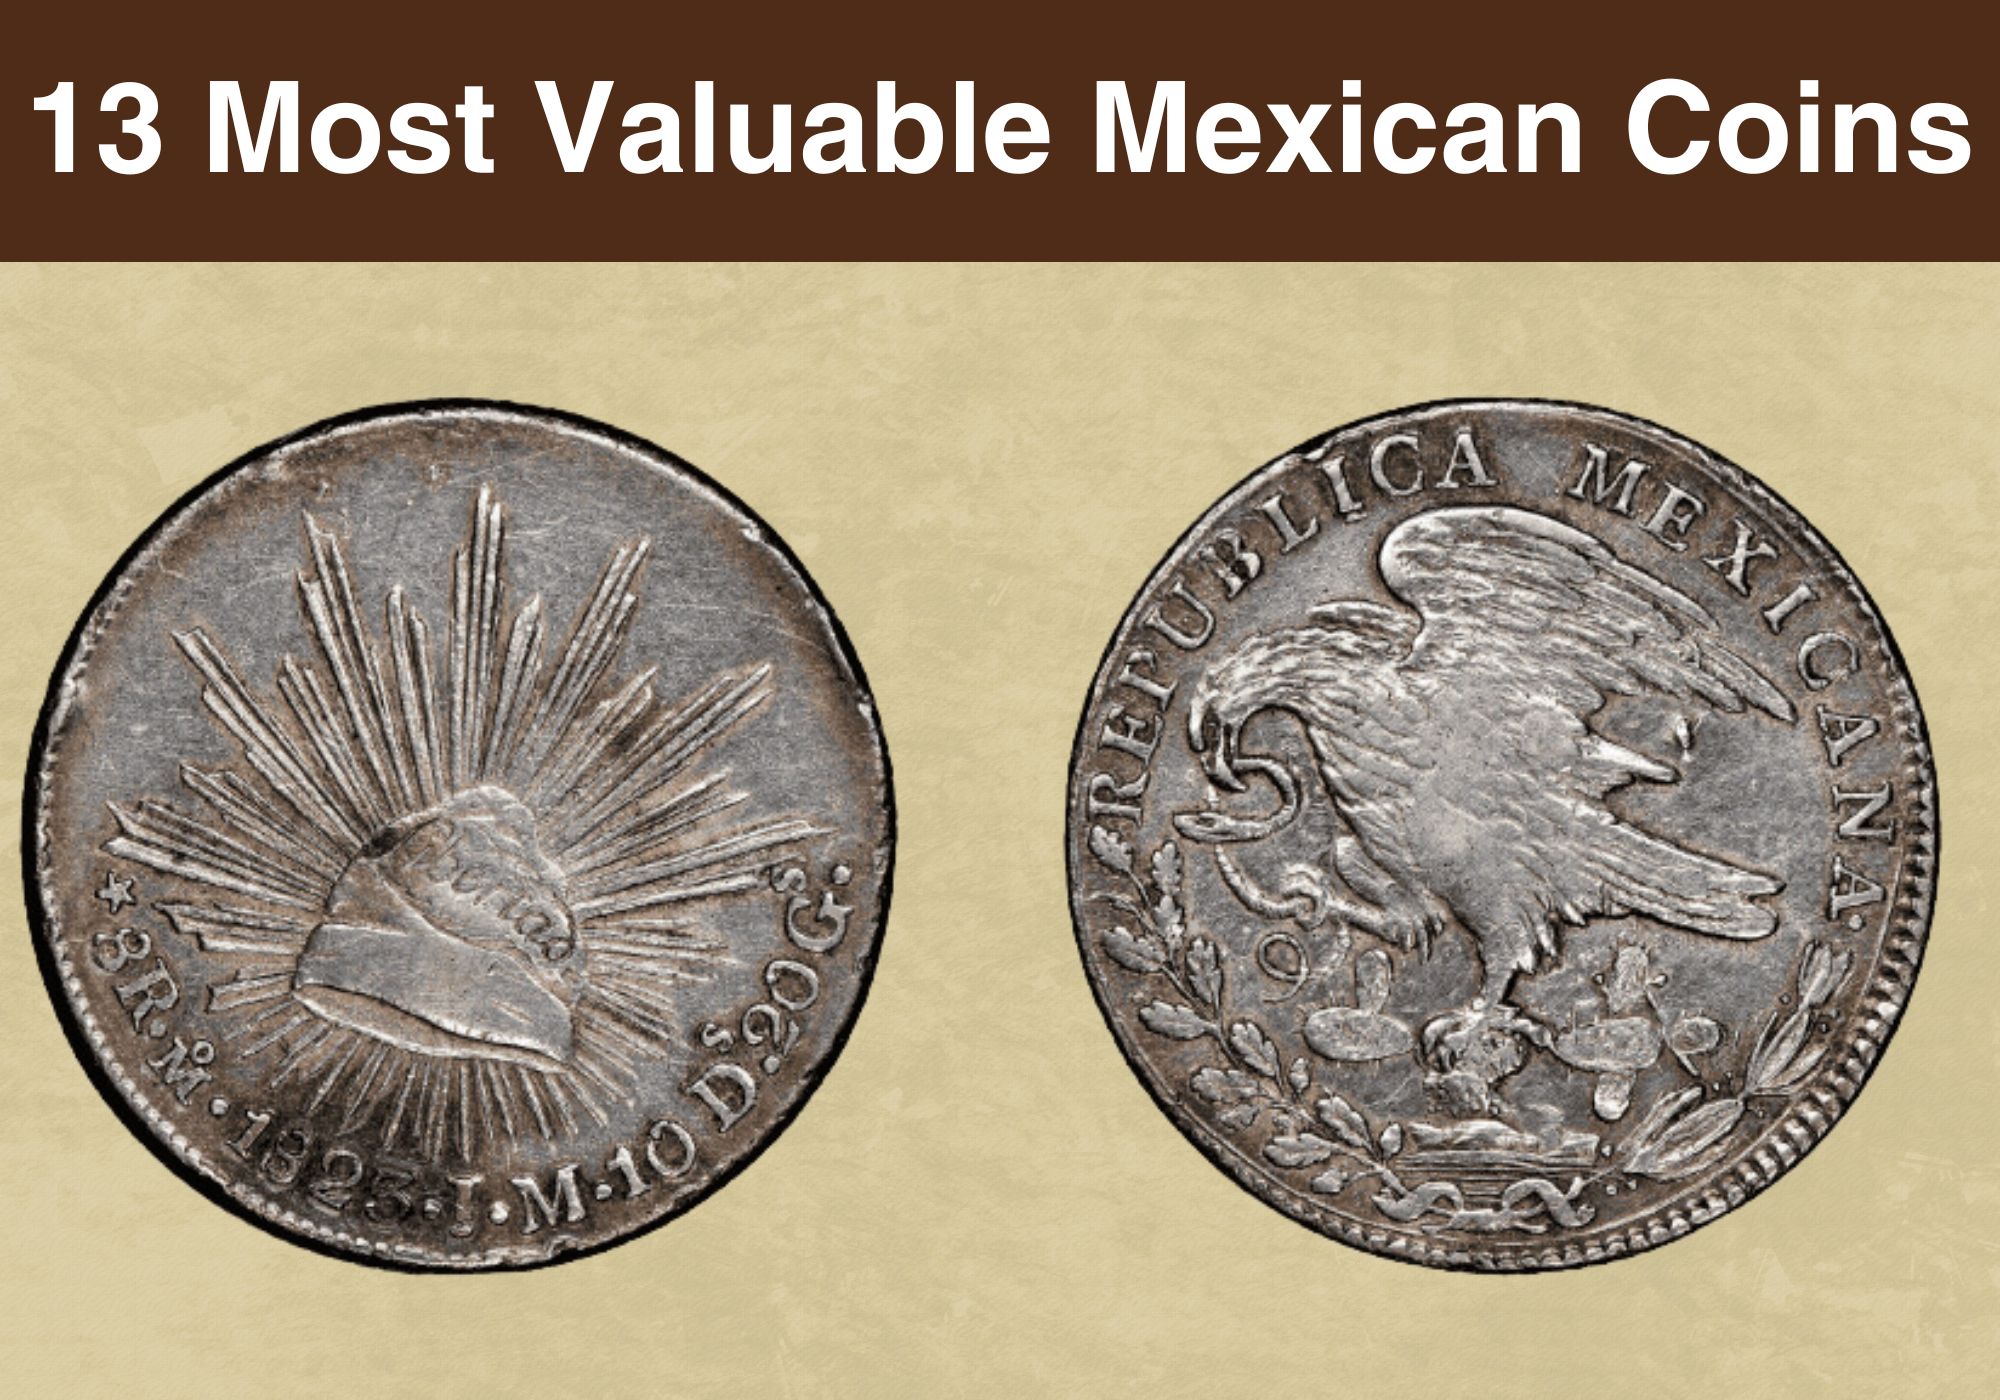 Antique Silver Plate Price and Value Guide